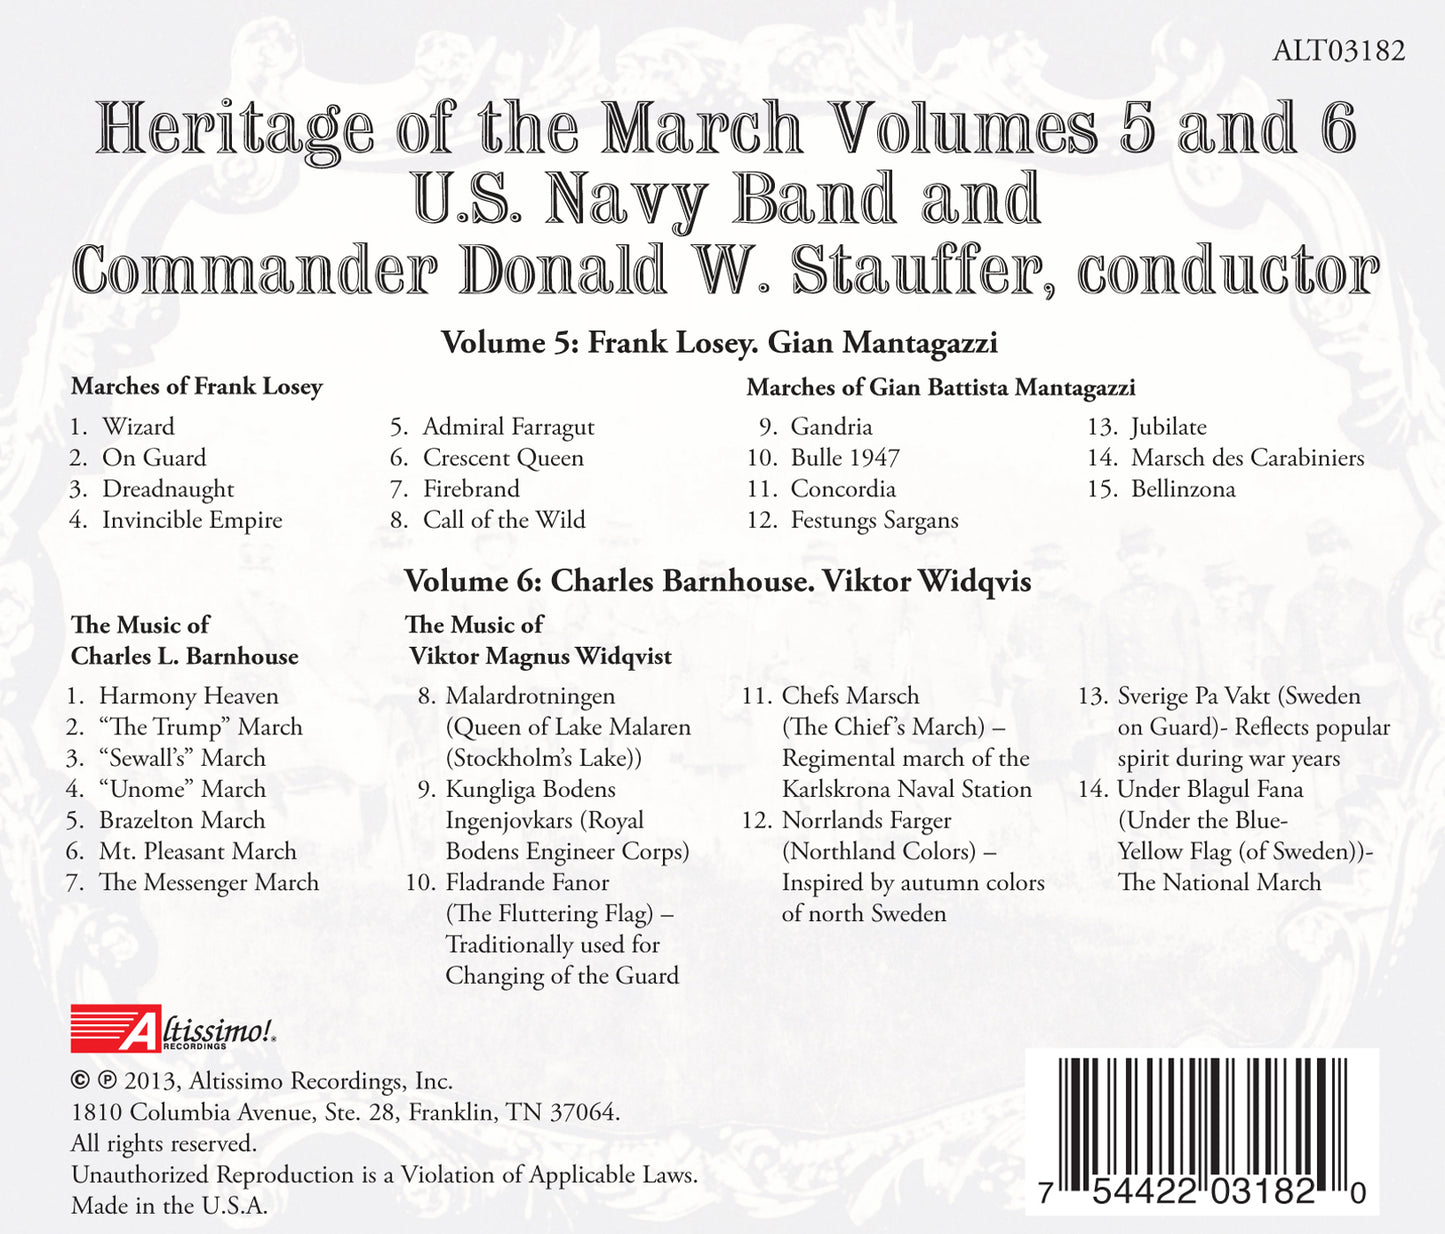 Heritage of the March, Vols. 5 & 6 [2 CDs]